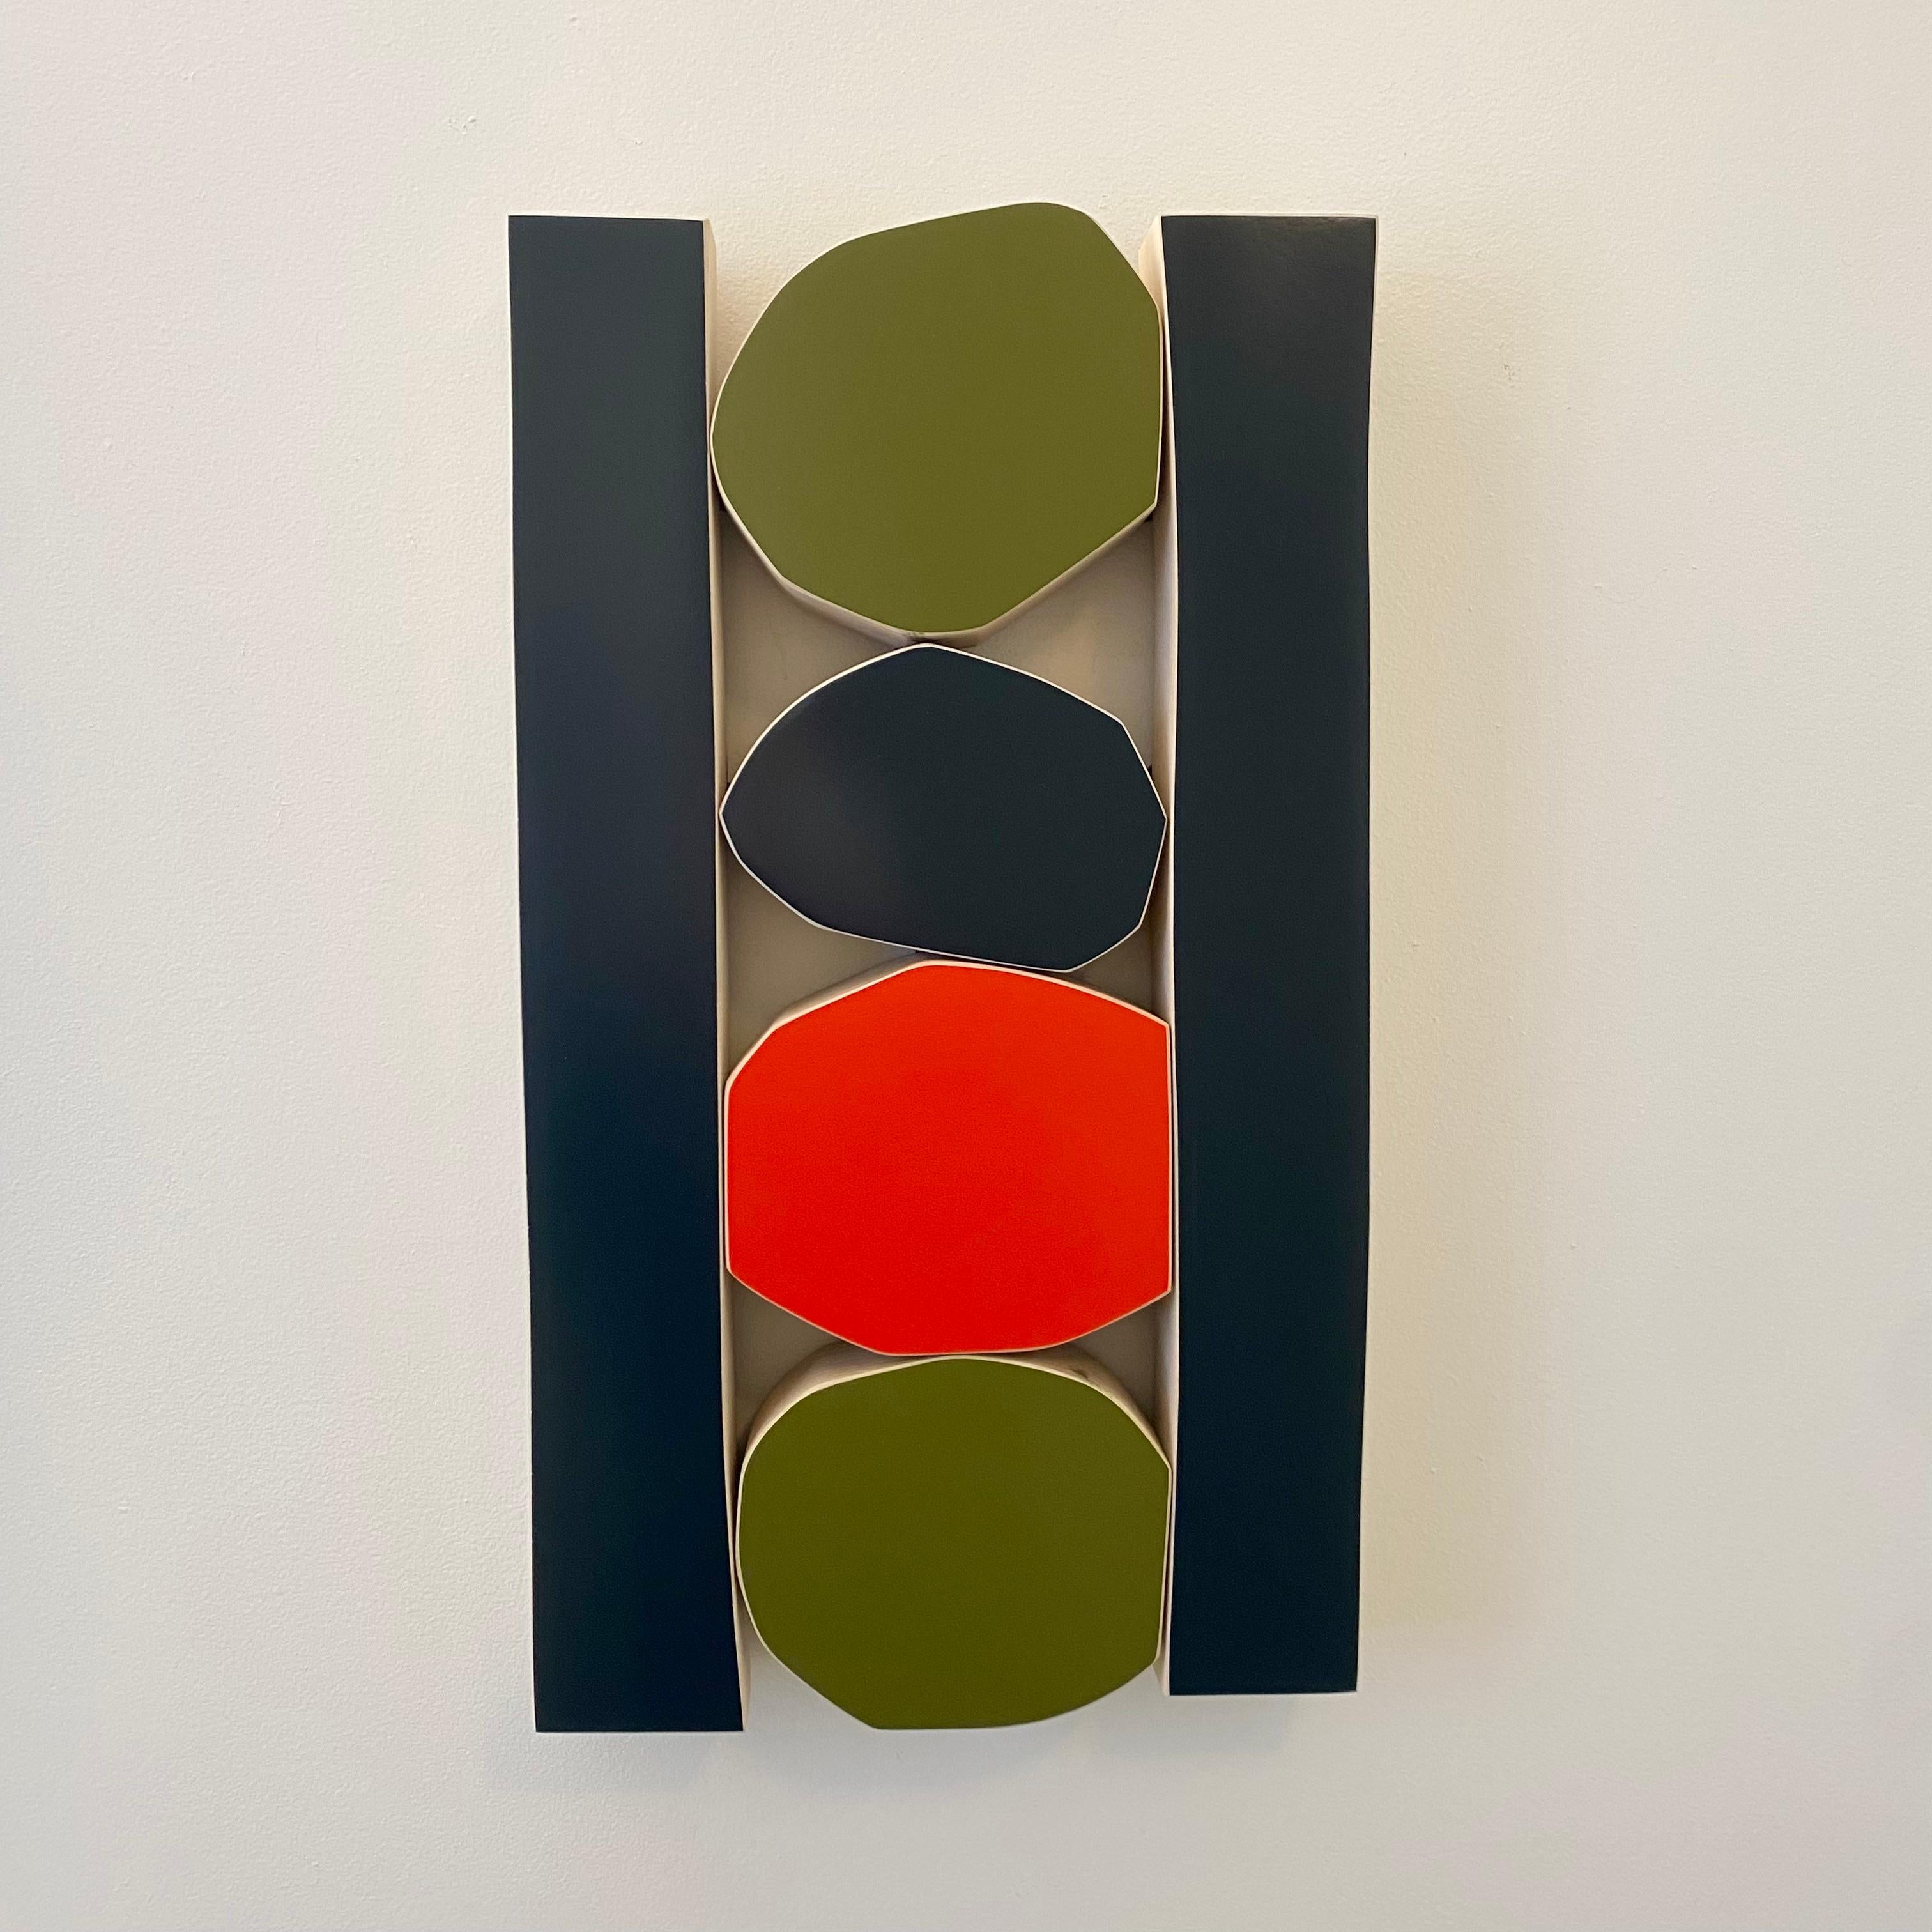 Artwork made with spray acrylic on poplar with gloss clearcoat

Small Pop series are minimalist driven, wood wall sculptures that are small and blocky and feature bright saturated colors. The pieces was inspired by my love for simple bold colors and